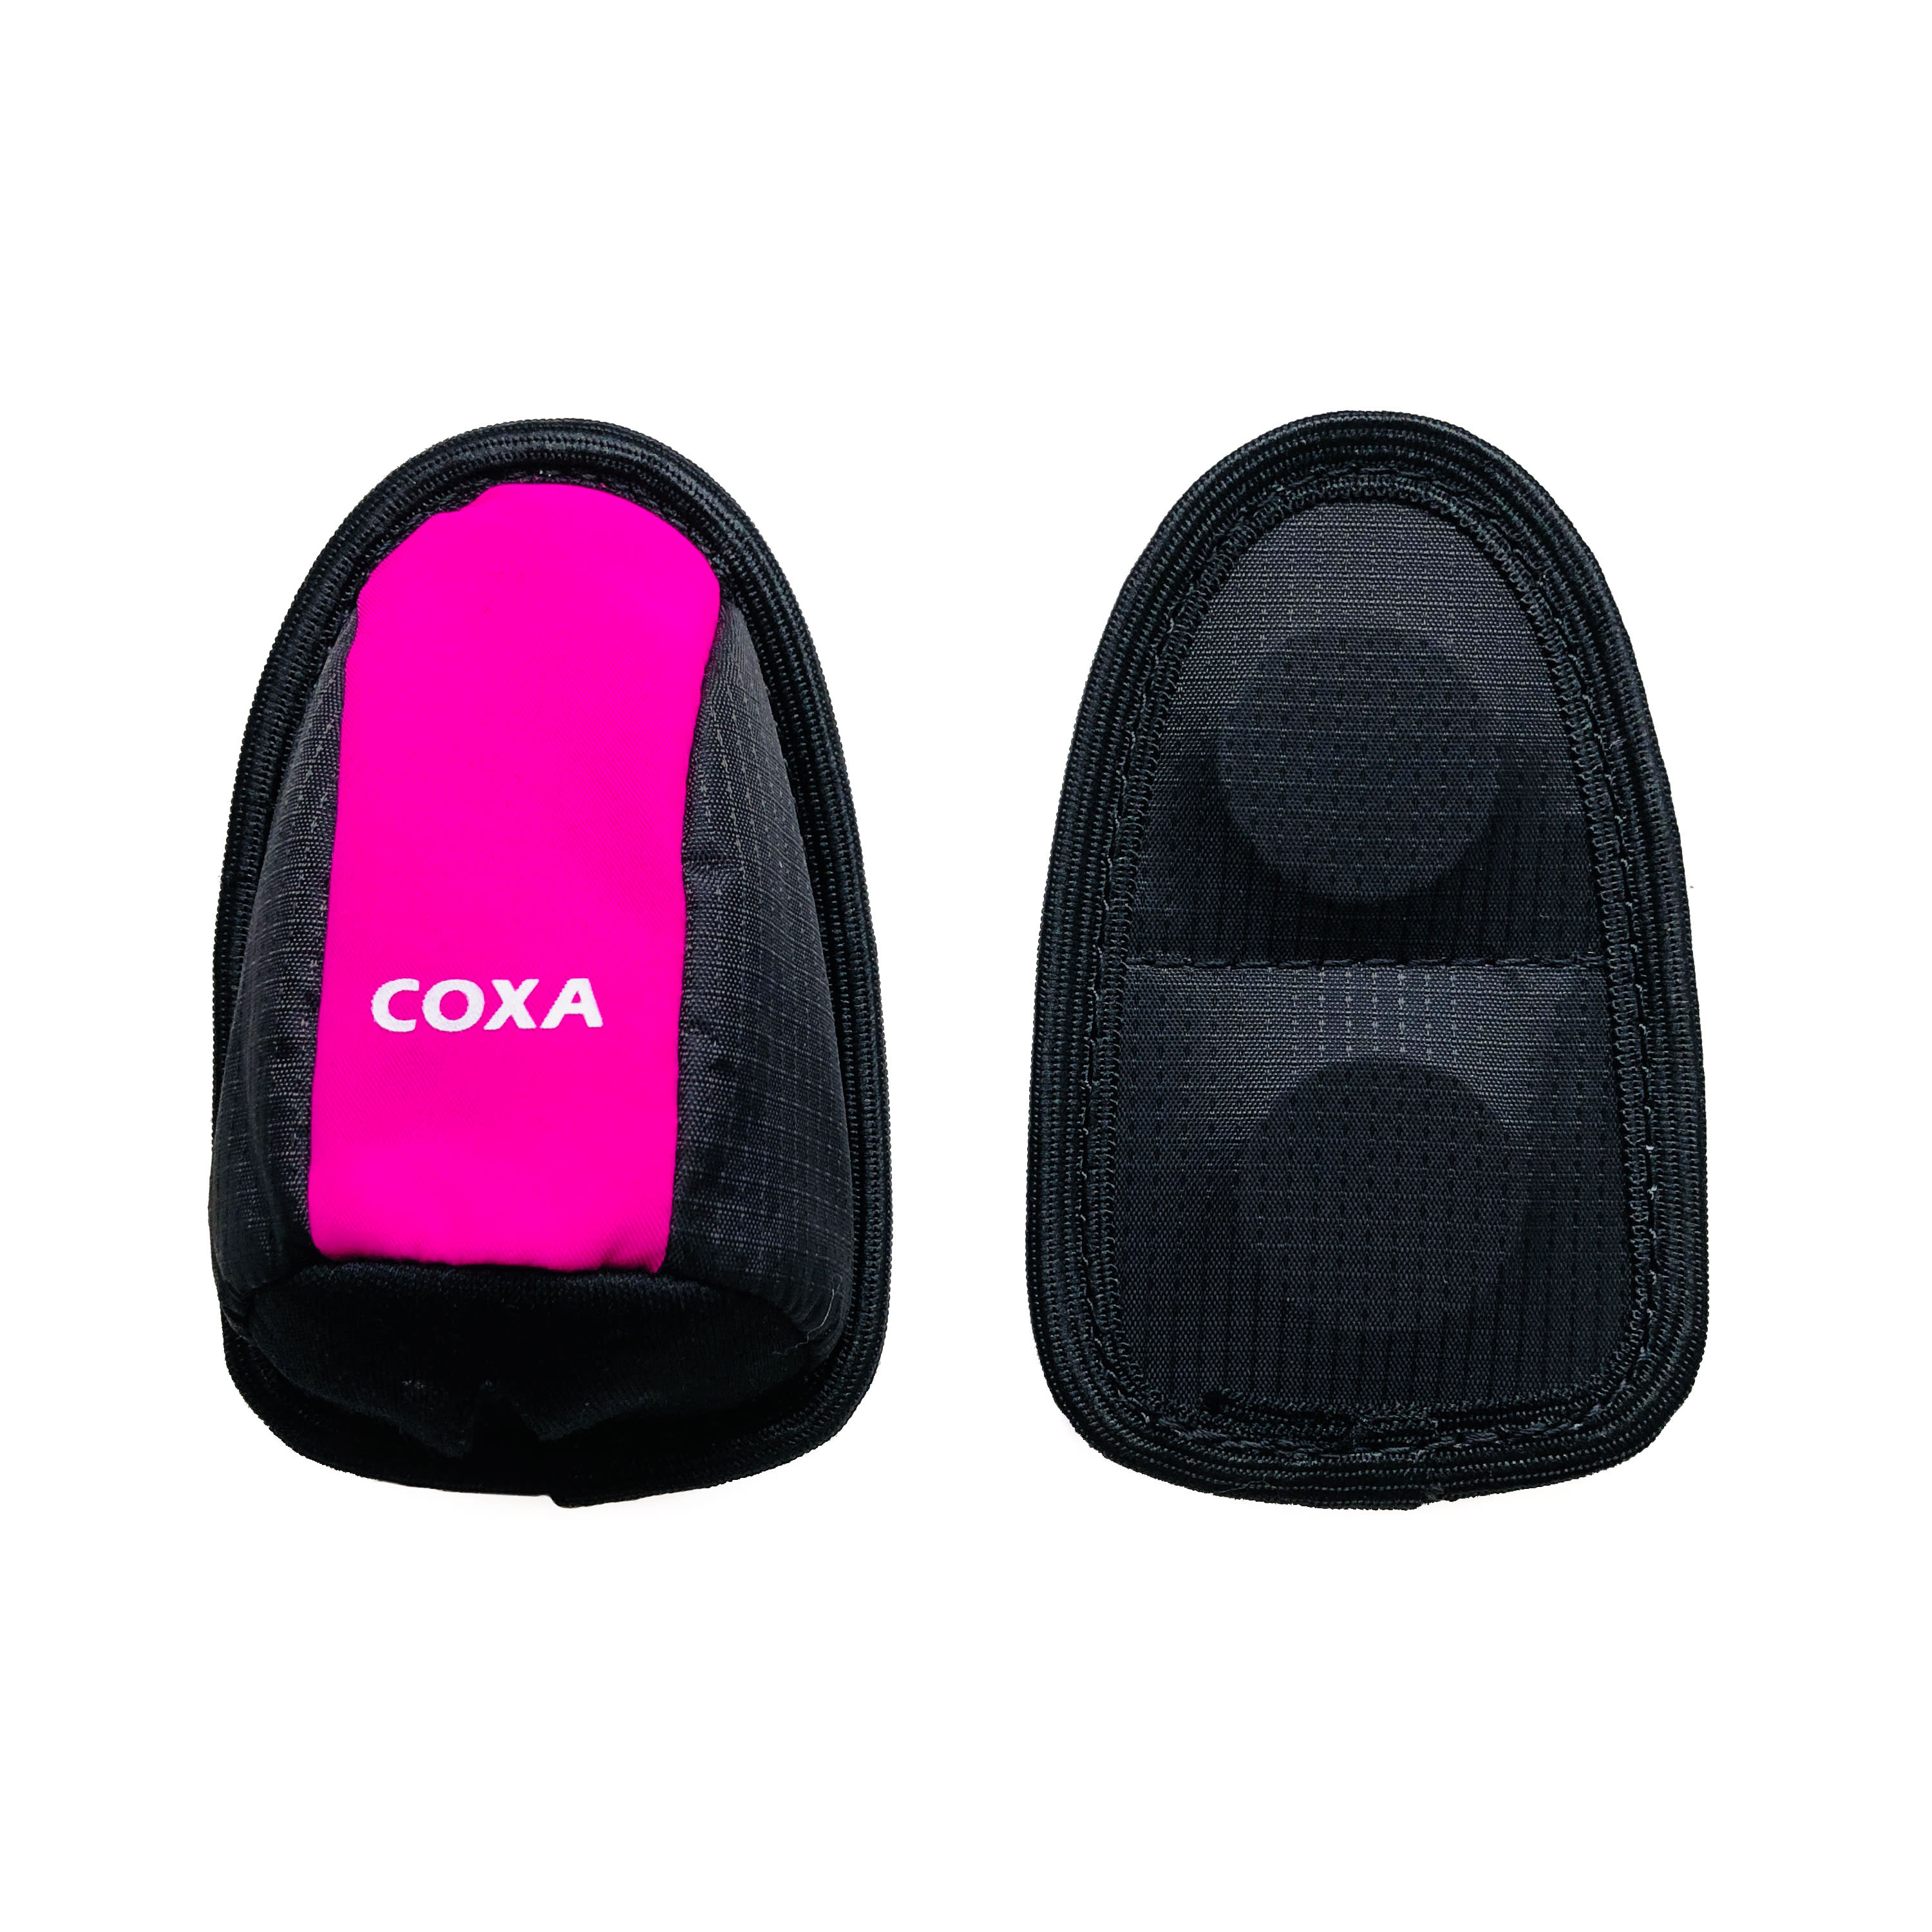 Coxa Carry Anti Freeze Case Magnet Black/Pink